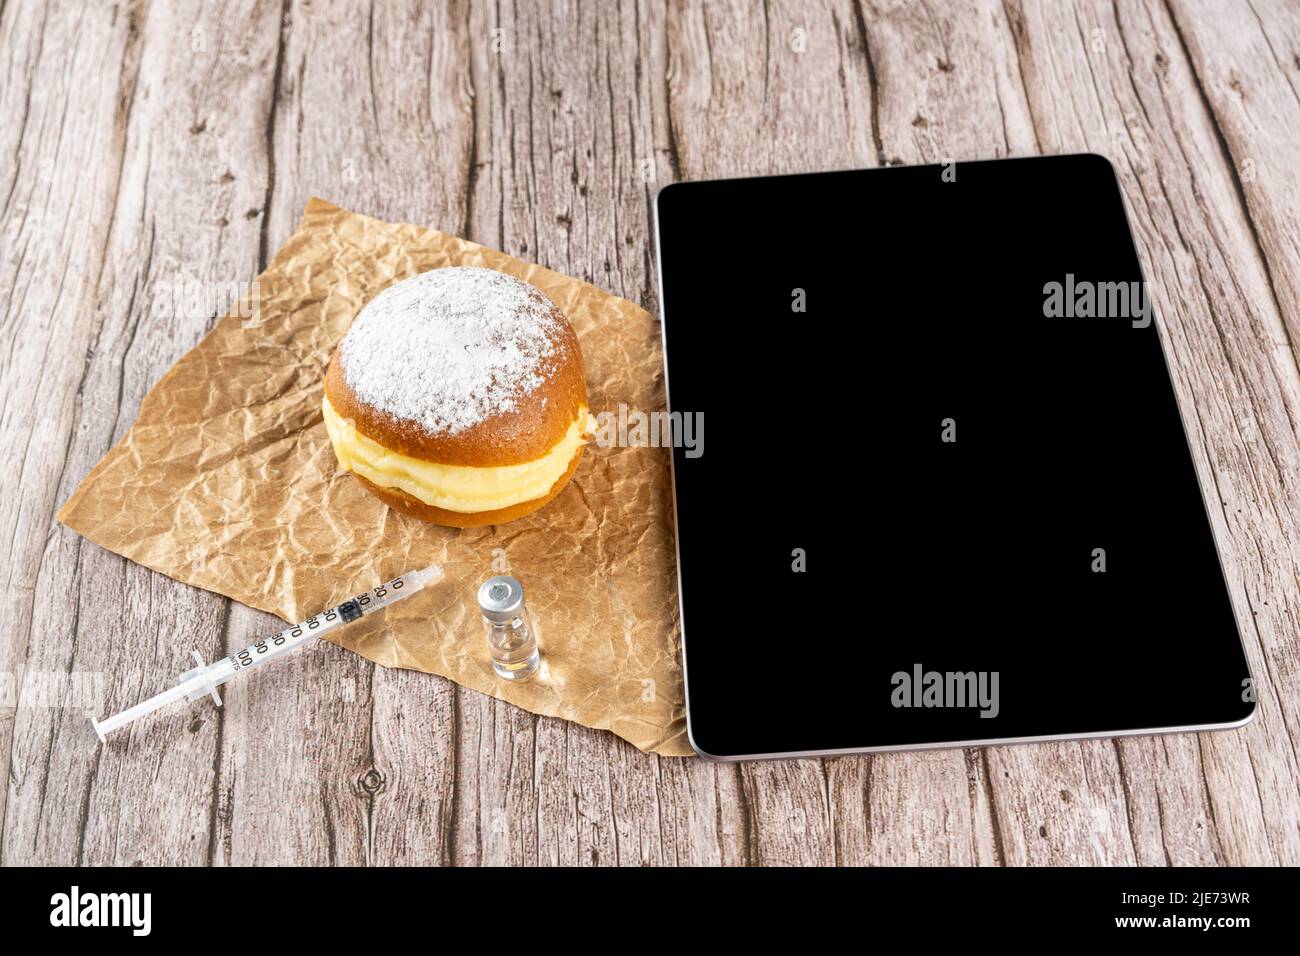 Brazilian cream doughnuts next to a syringe and an ampoule of insulin and a tablet. Stock Photo